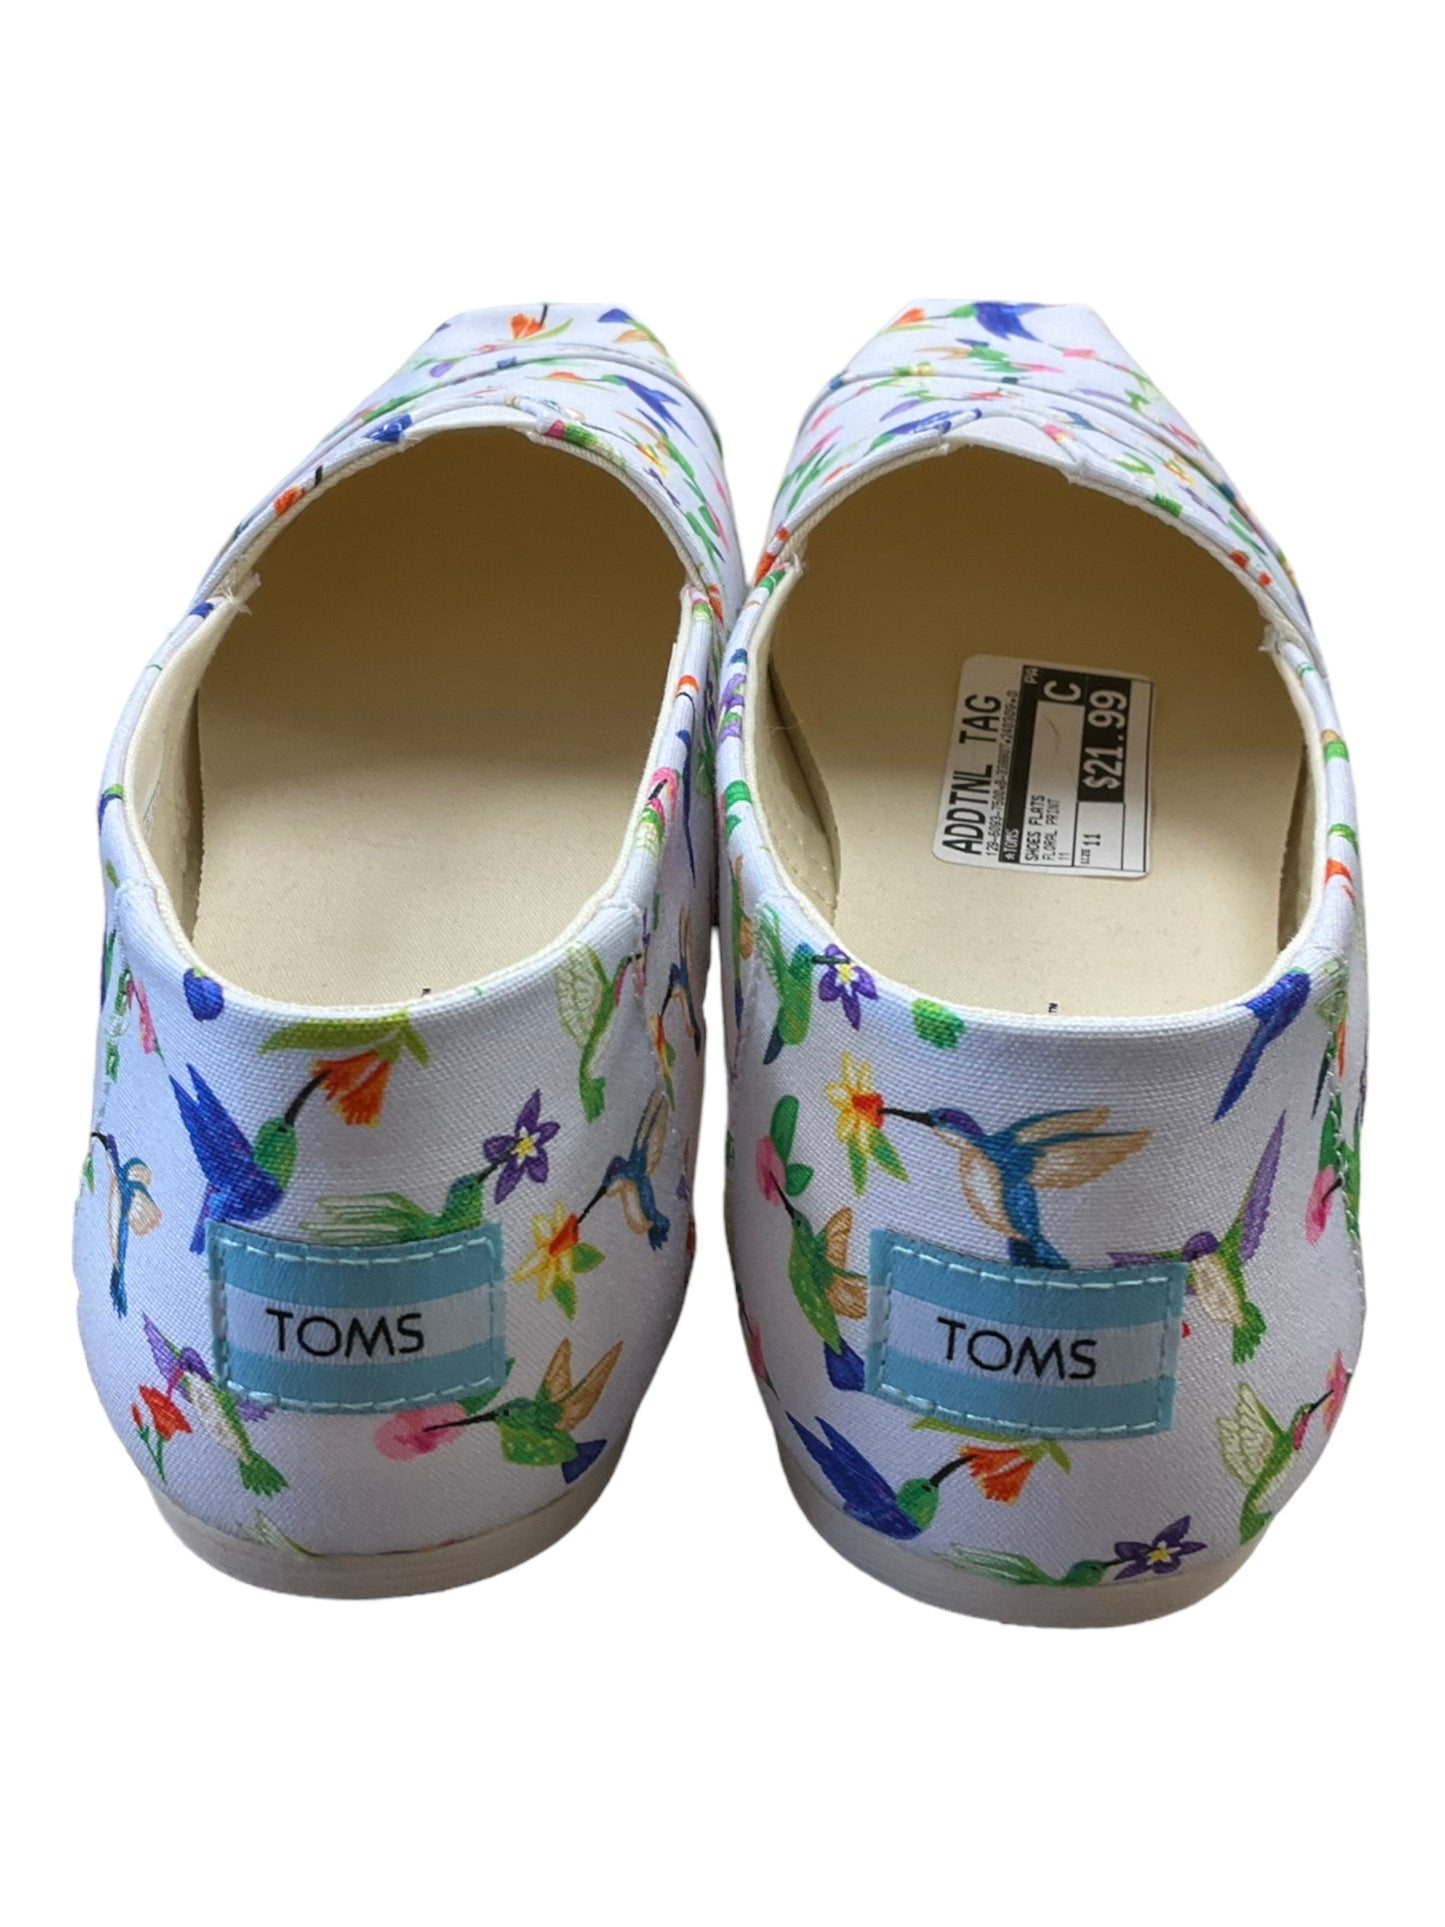 Shoes Flats By Toms  Size: 11